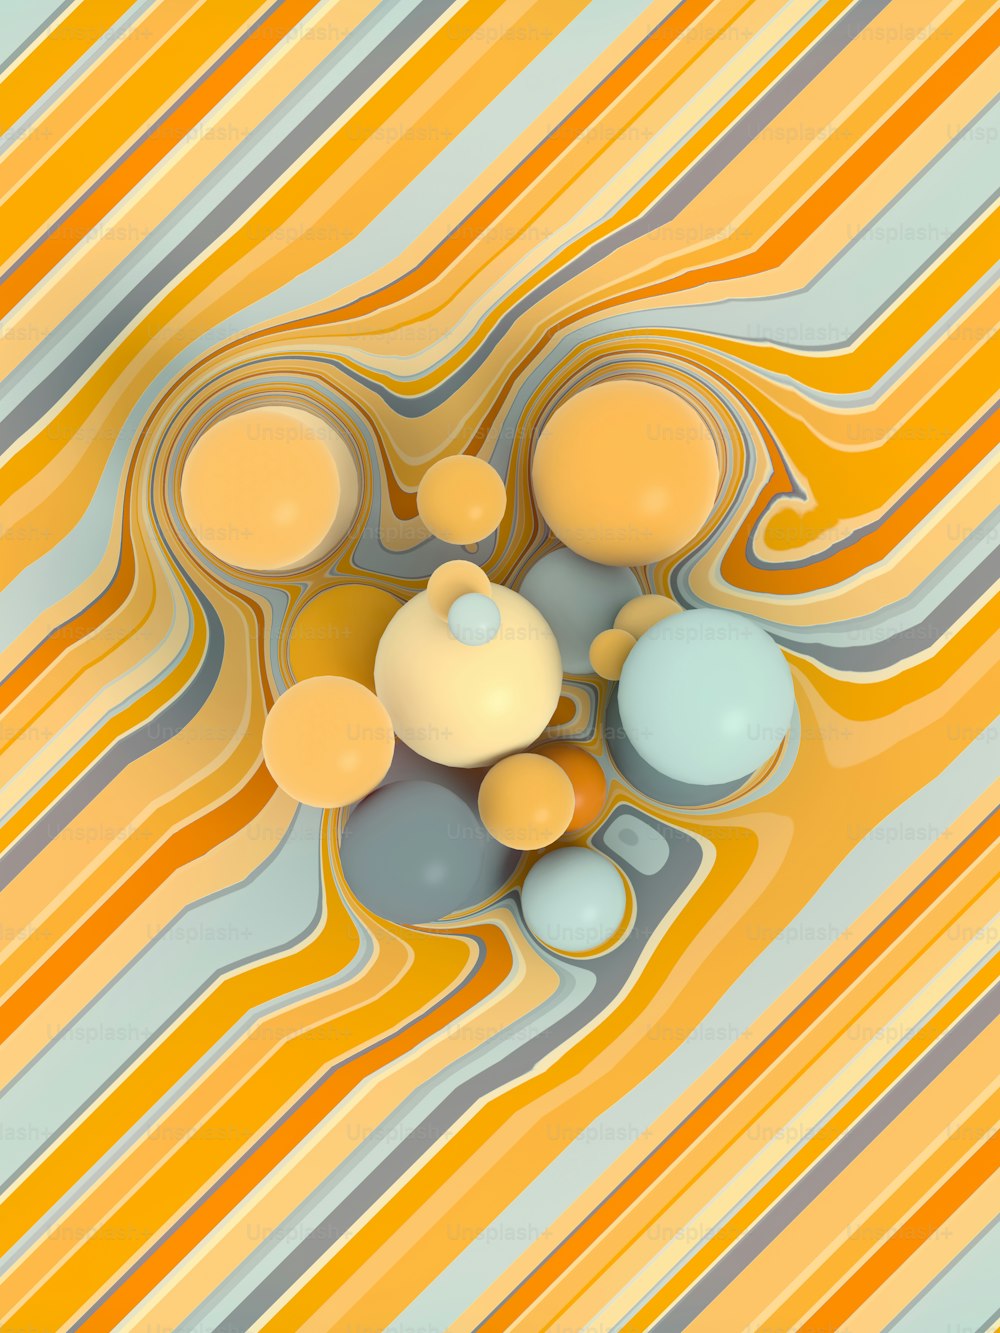 Group of colored balls pattern on light striped background. Abstract multi colored geometric backdrop. 3d rendering digital illustration